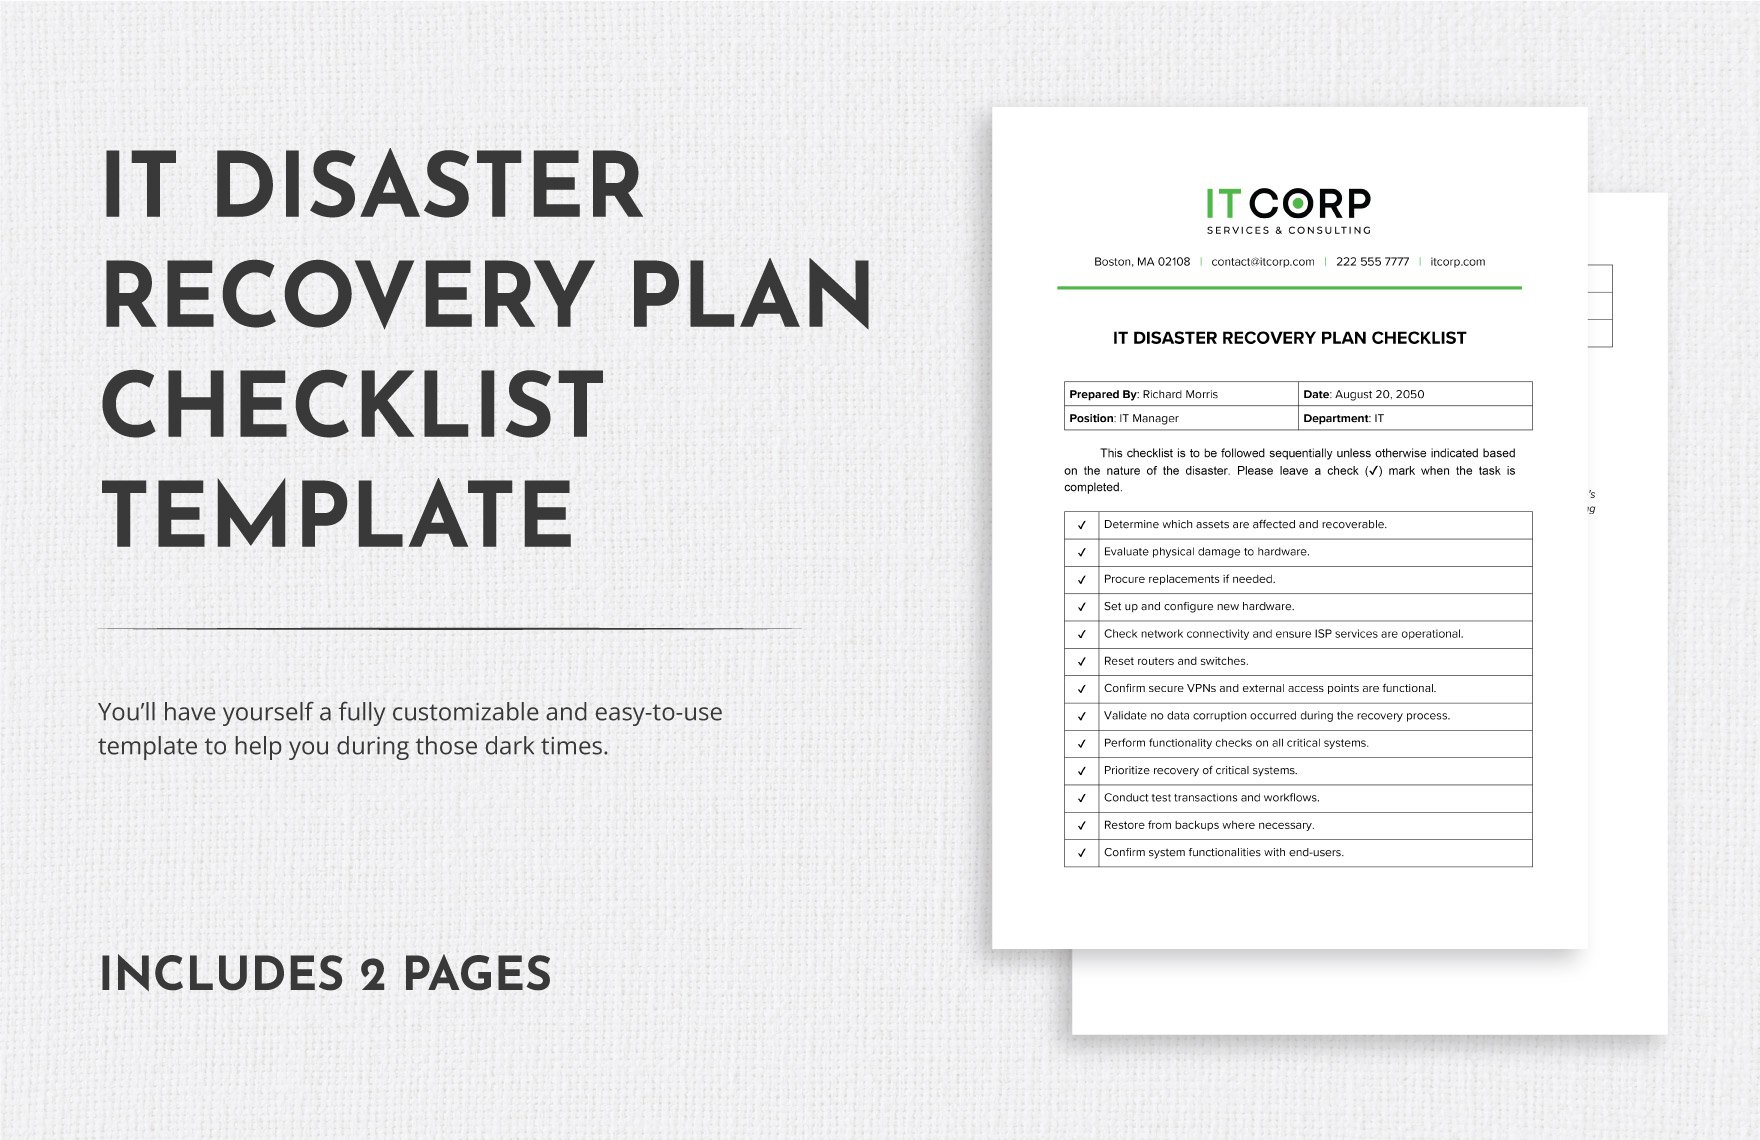 IT Disaster Recovery Plan Checklist Template in Word, Google Docs, PDF